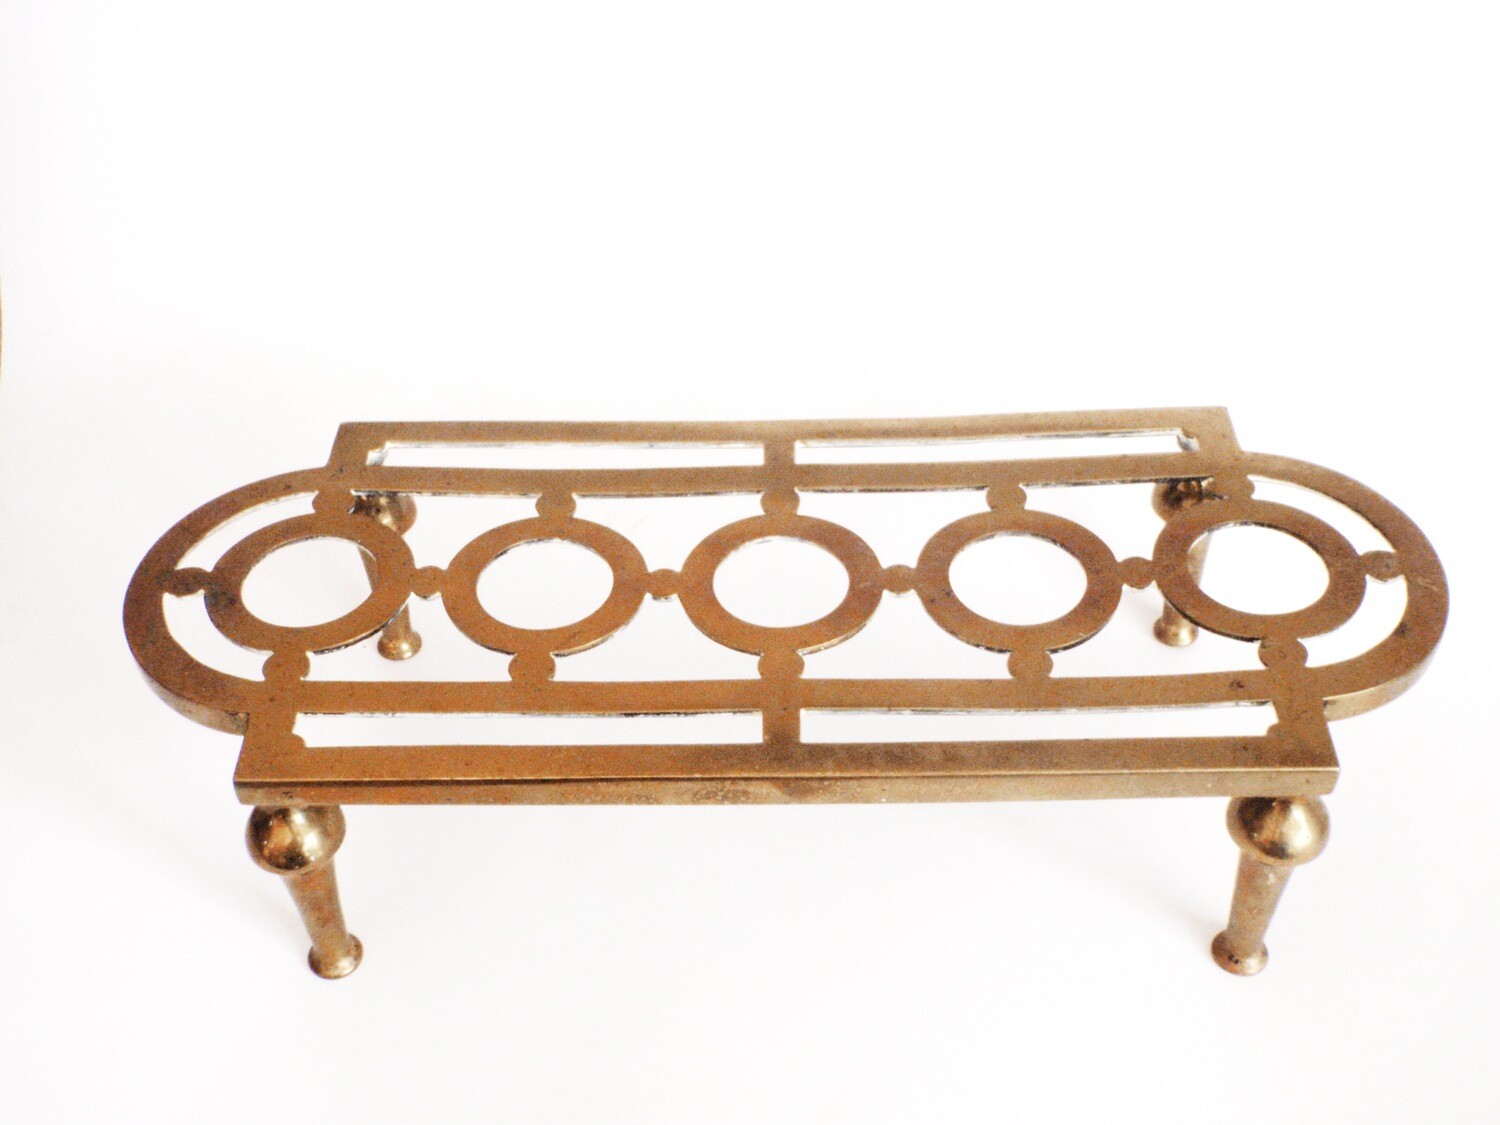 William Tonks and Sonse Large Footed Trivet 